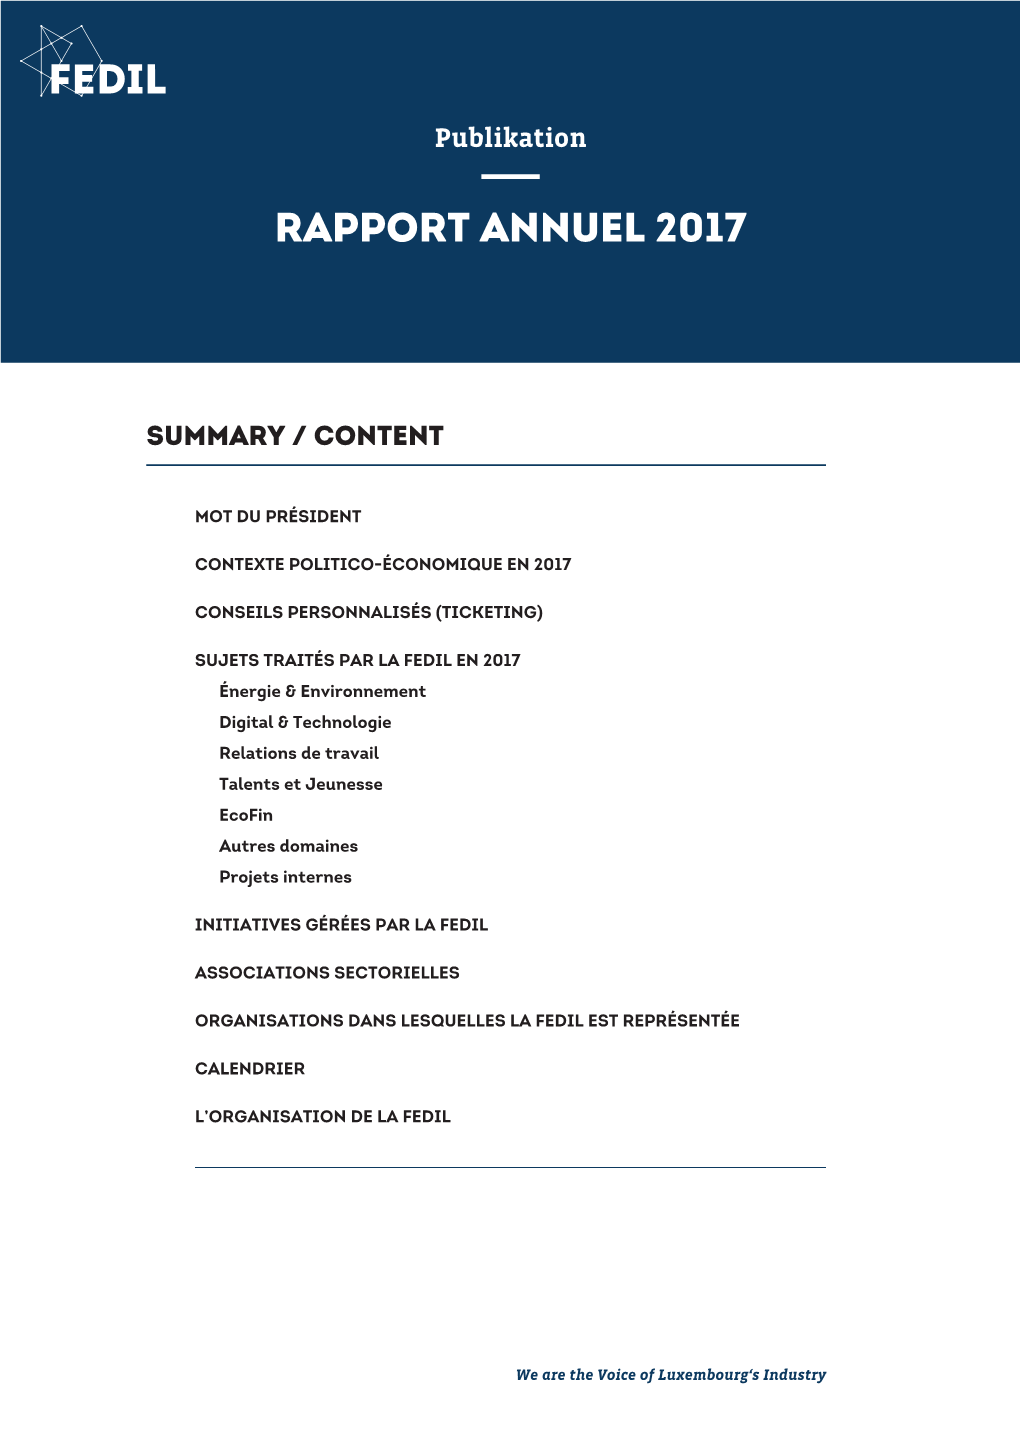 Rapport Annuel 2017